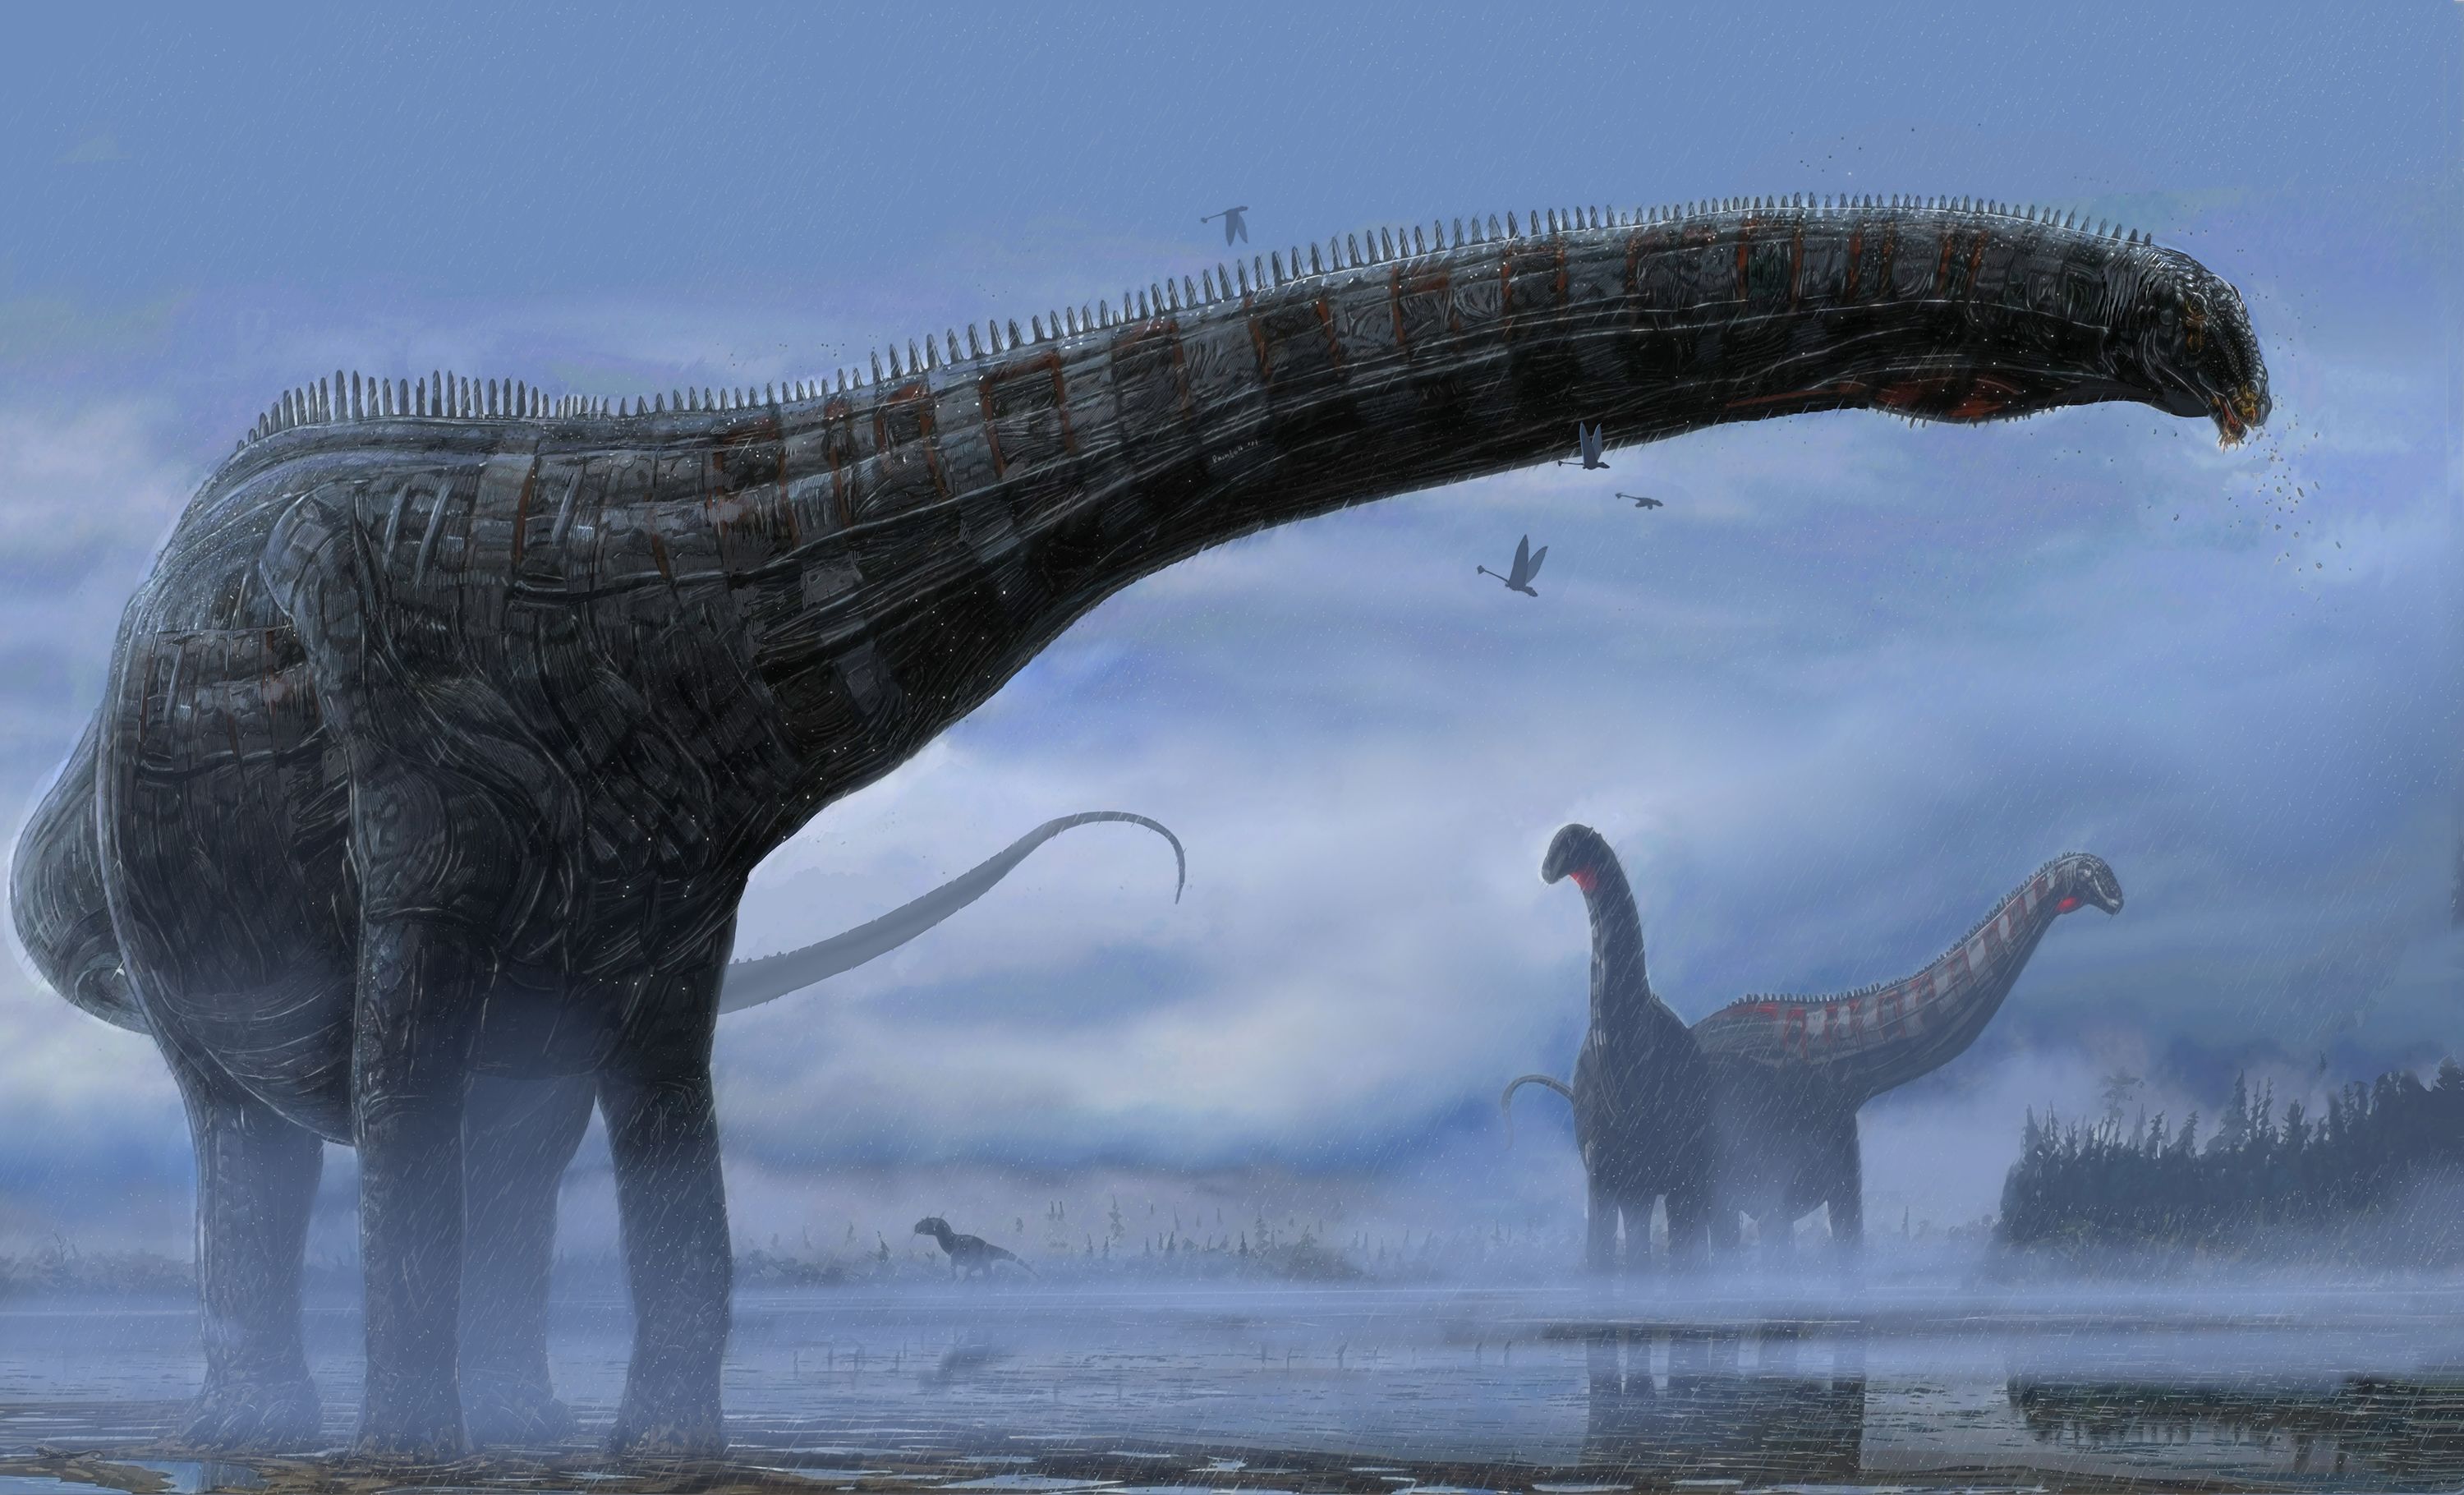 Scientists say dinosaurs were already disappearing before giant